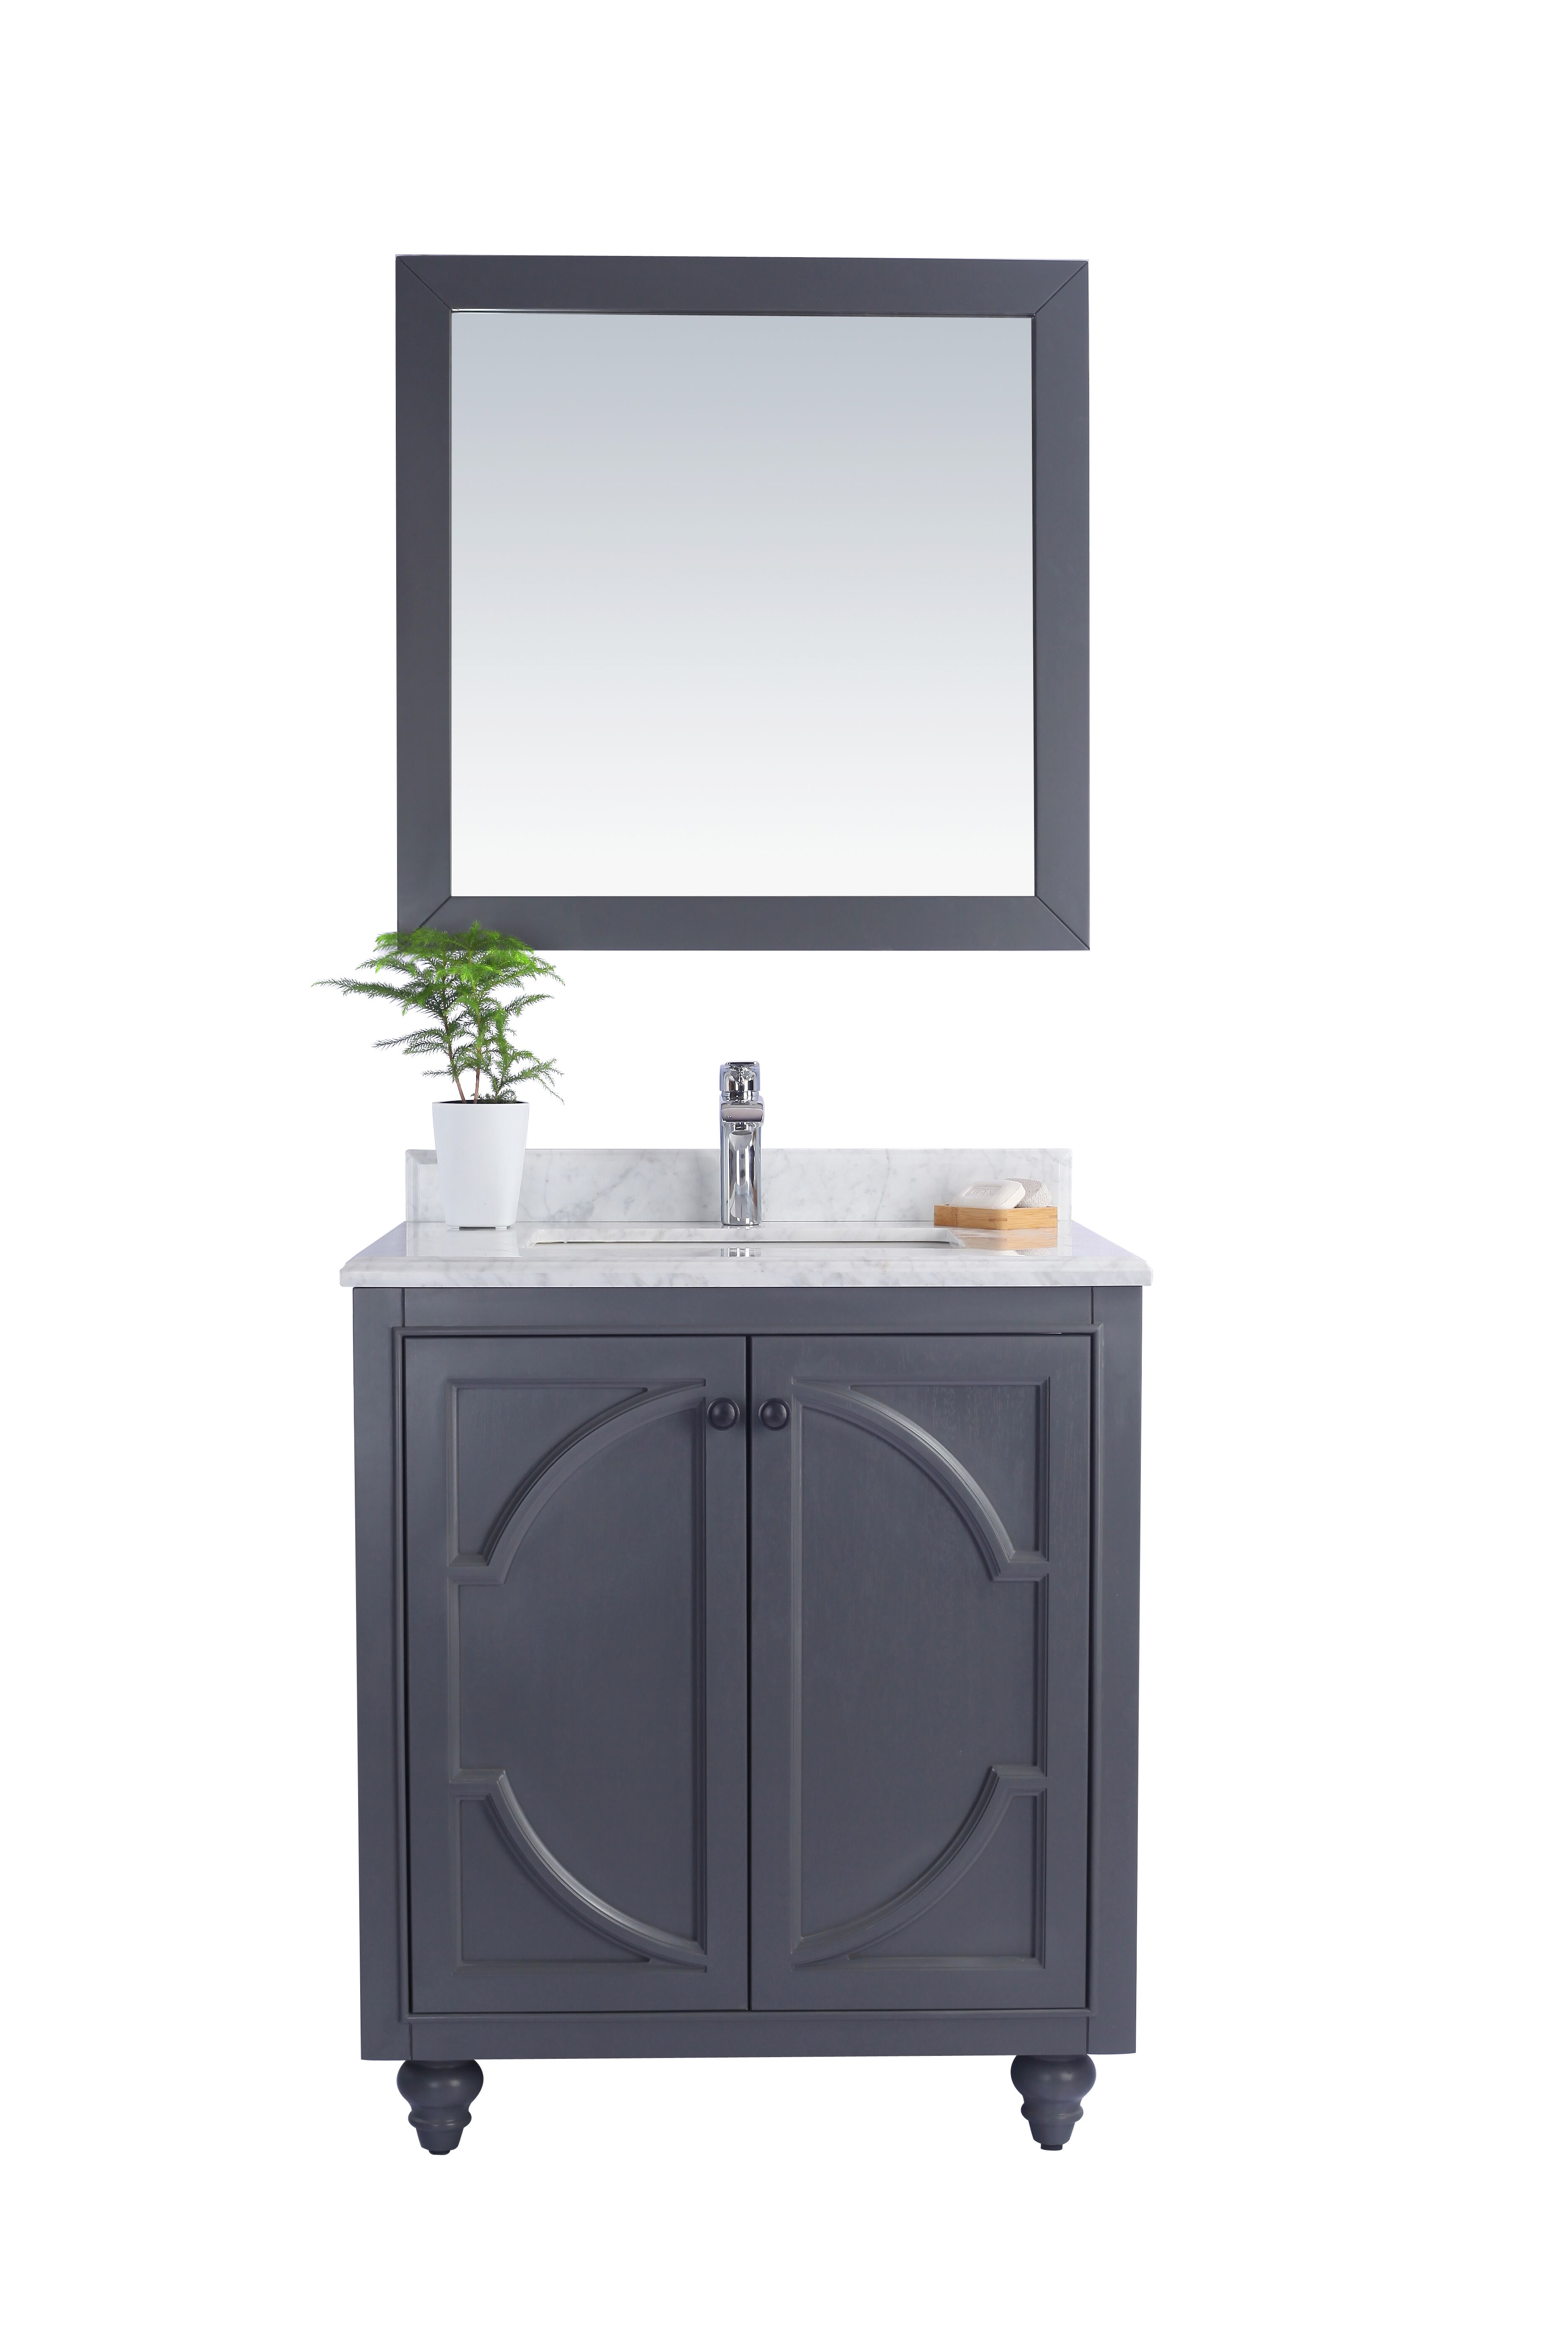 30" Single Bathroom Vanity Cabinet + Top and Color Options